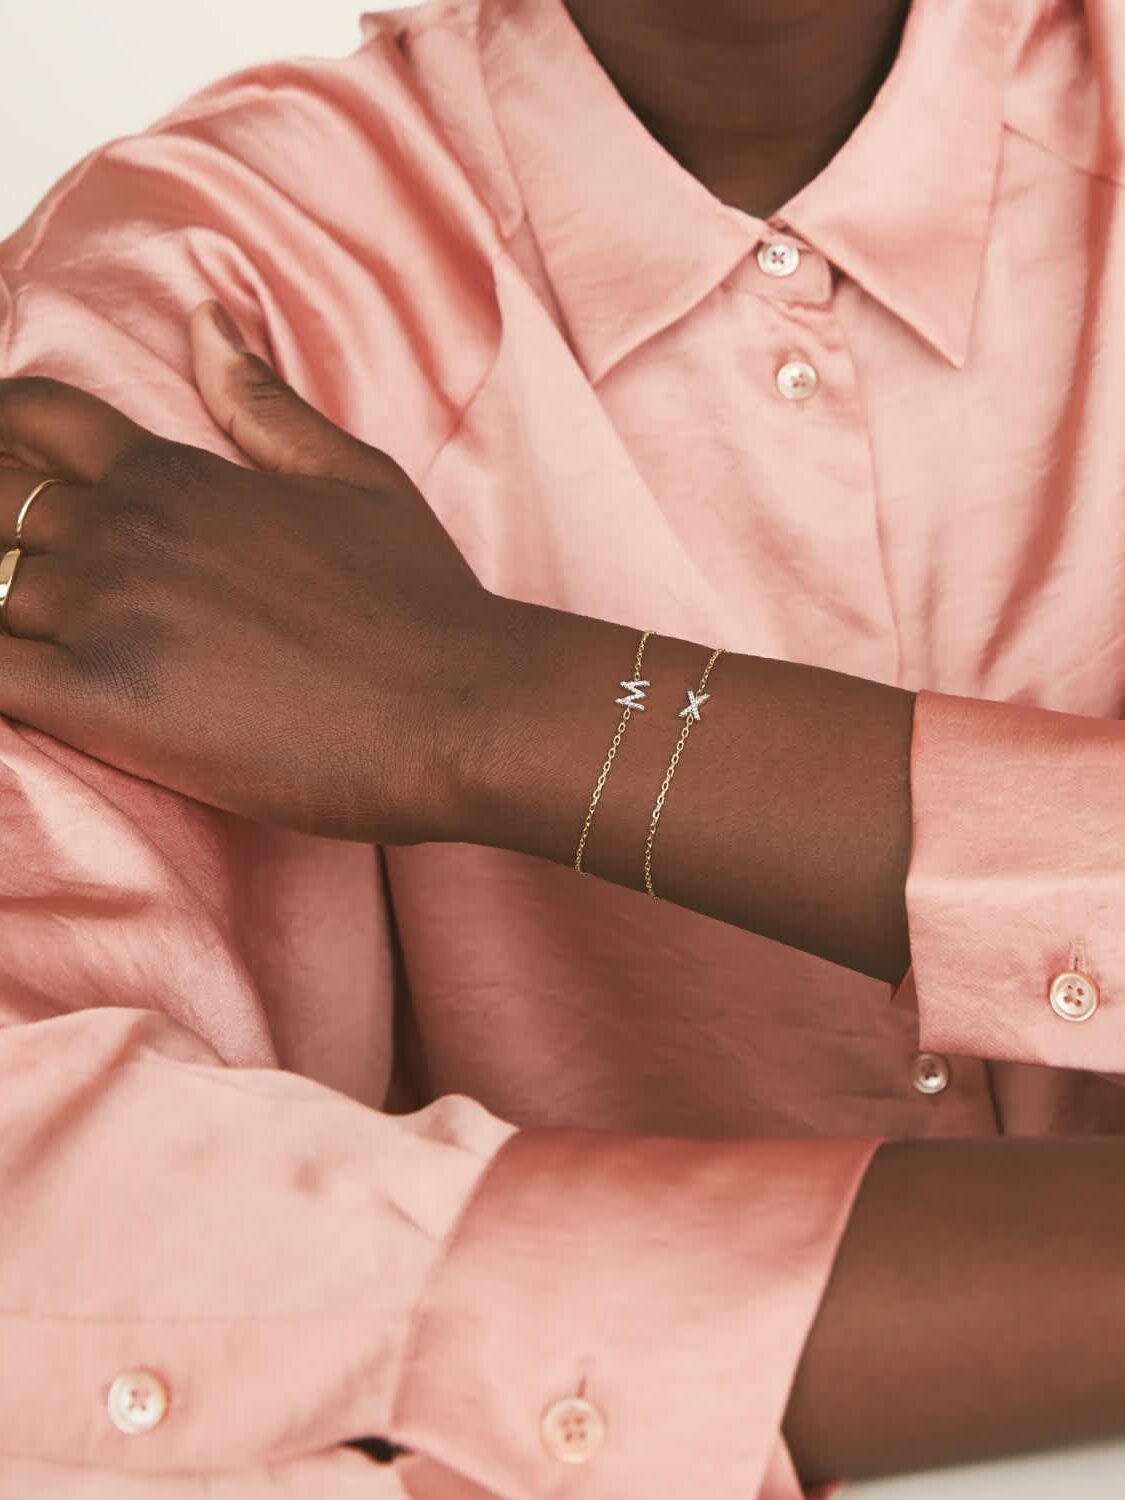 Initial charms on chain bracelets are displayed on a model's wrist